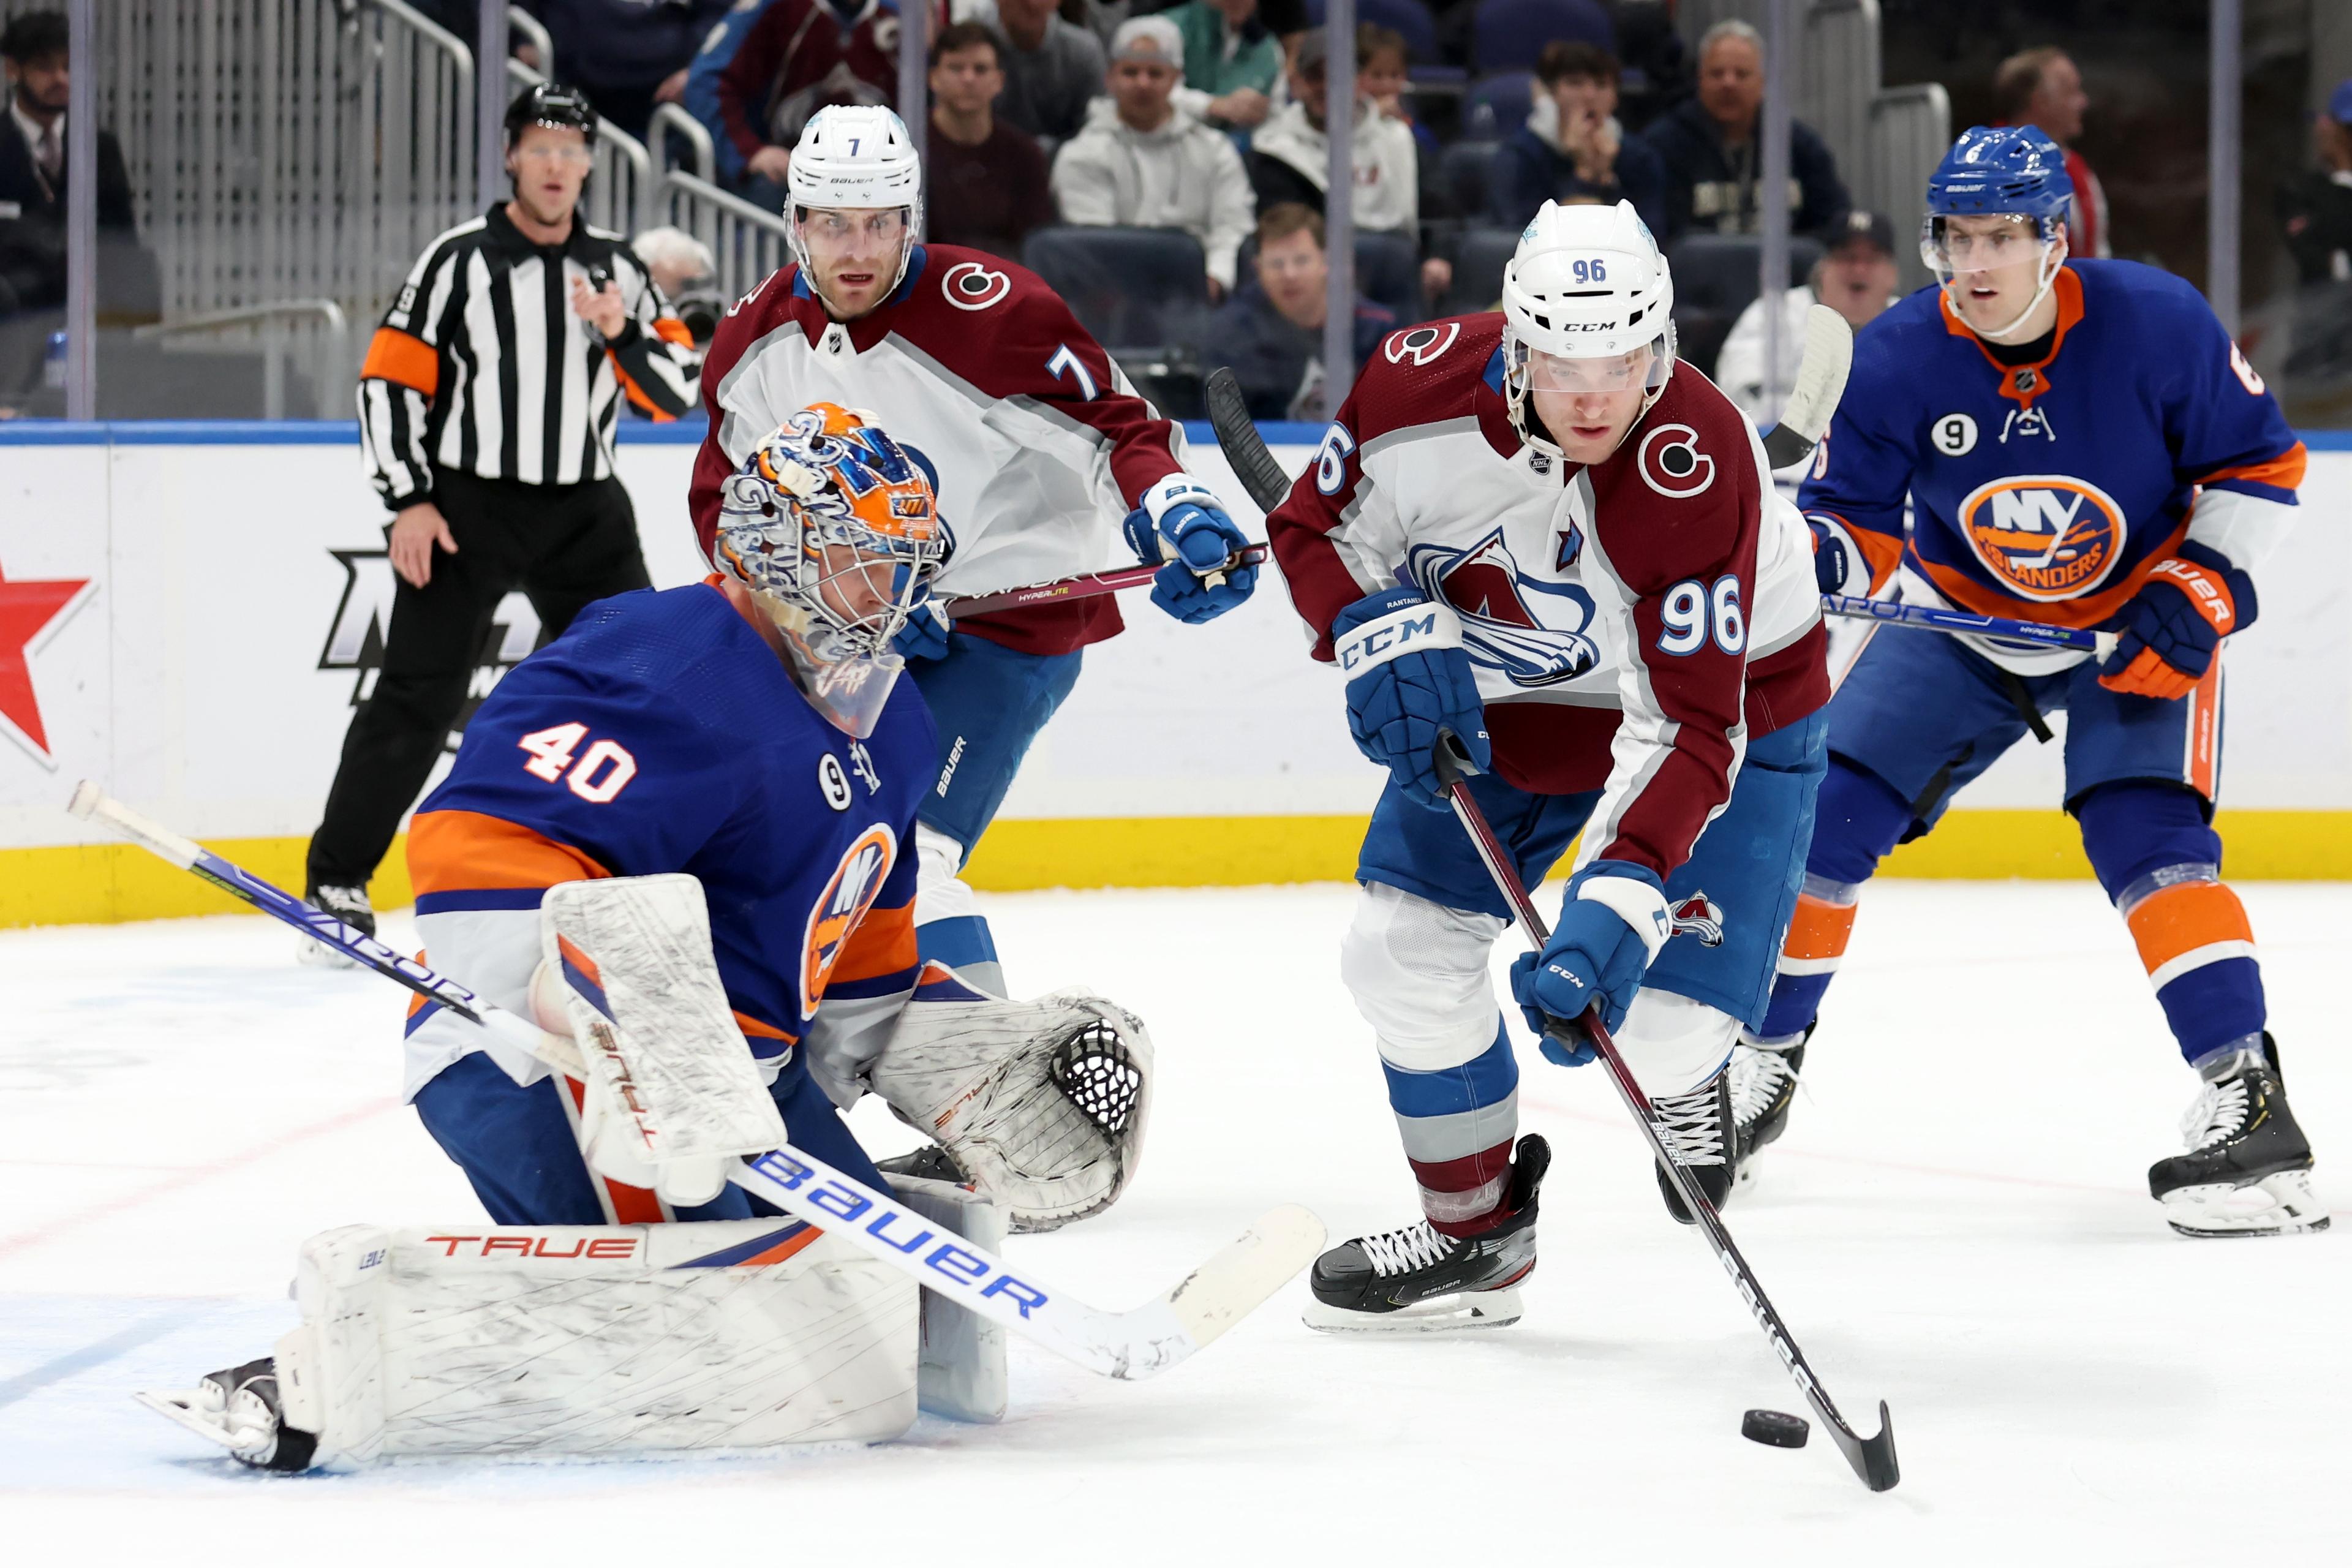 Mar 7, 2022; Elmont, New York, USA; Colorado Avalanche right wing Mikko Rantanen (96) plays the puck in front of New York Islanders goaltender Semyon Varlamov (40) during the first period at UBS Arena. Mandatory Credit: Brad Penner-USA TODAY Sports / © Brad Penner-USA TODAY Sports